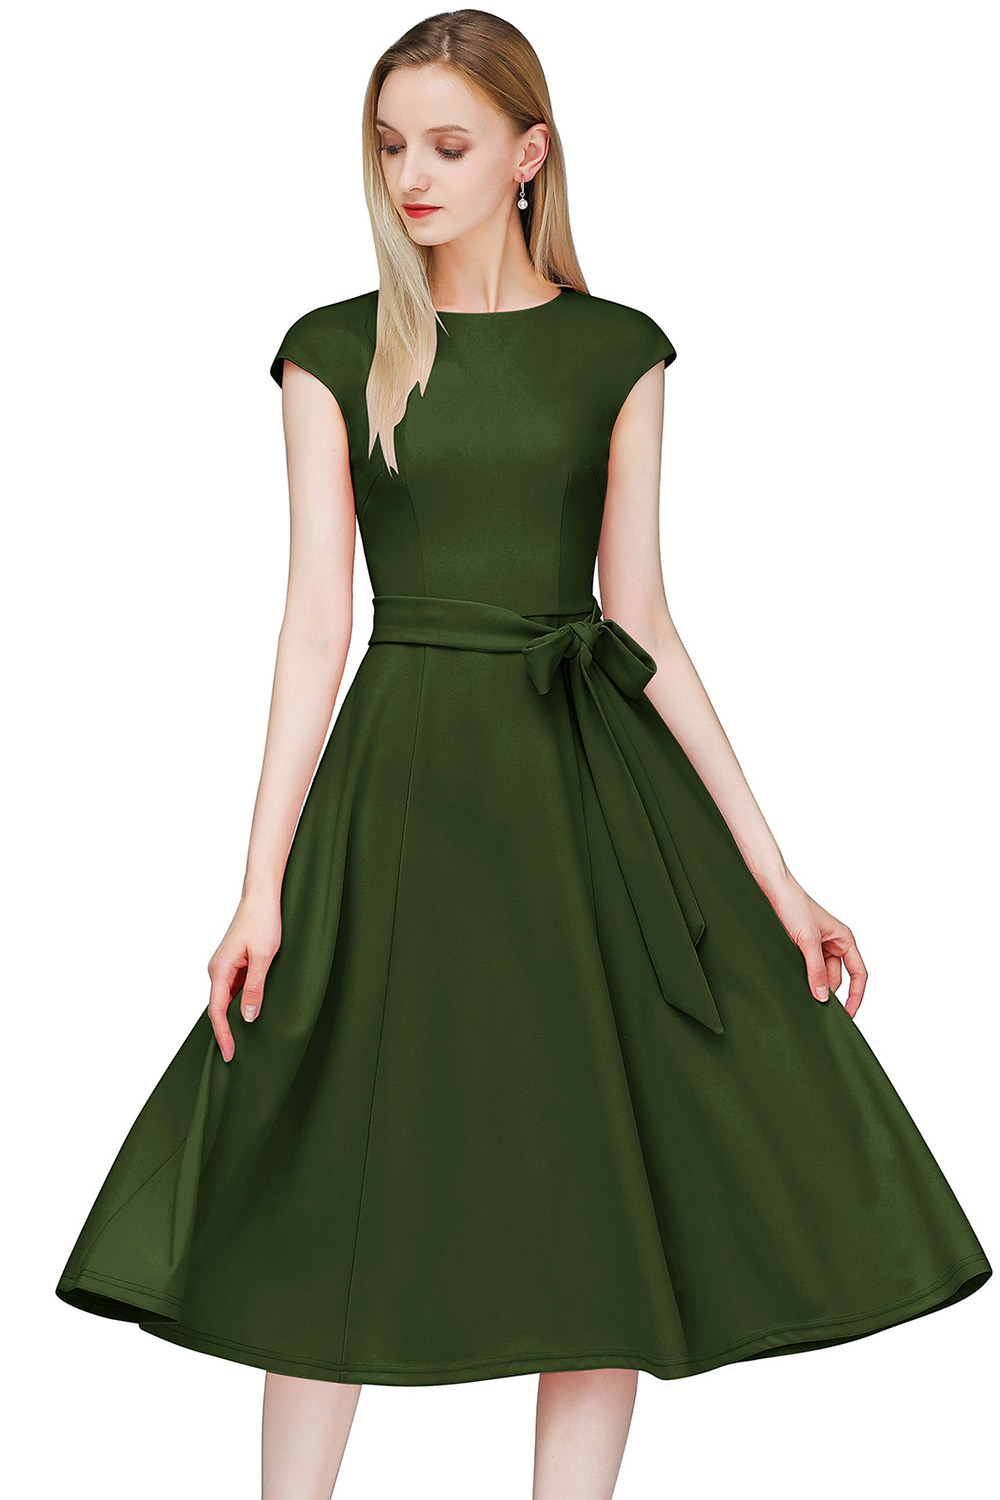 A-Line Knee-Length Armygreen Cocktail Dress with Cap Sleeves, Vintage Style, Unique and Elegant